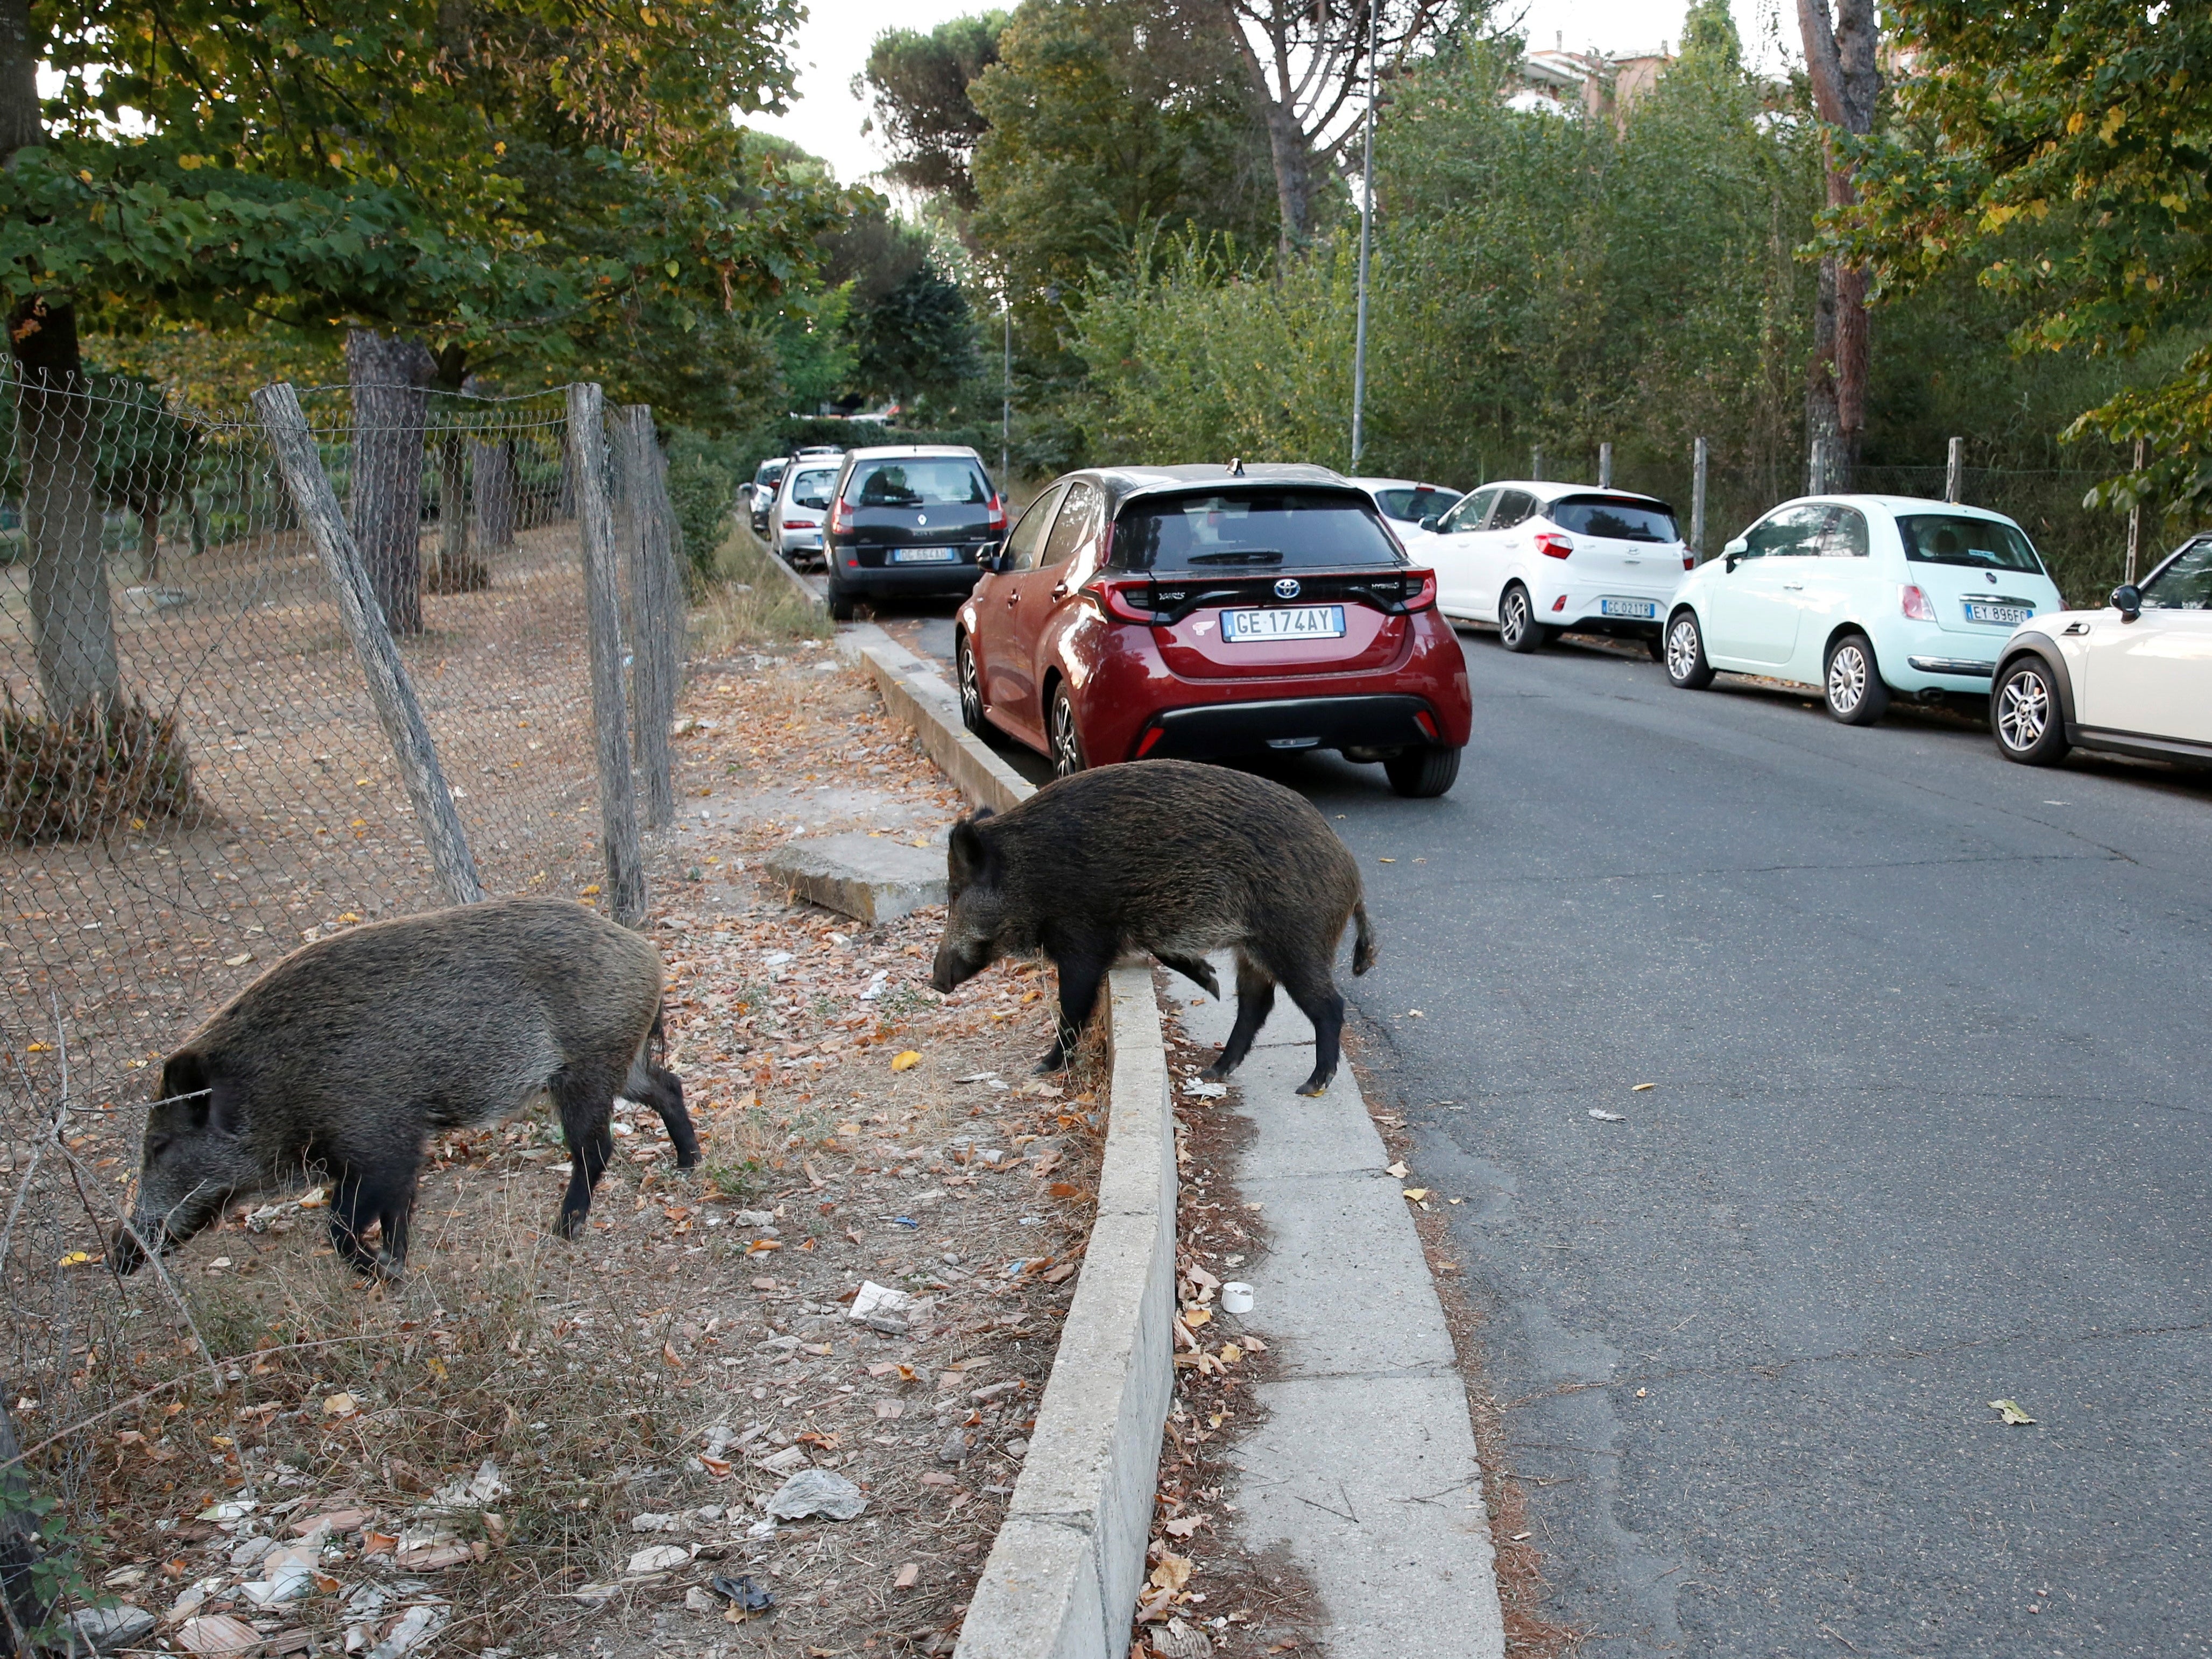 Rome has dealt with the issues surrounding boars for years